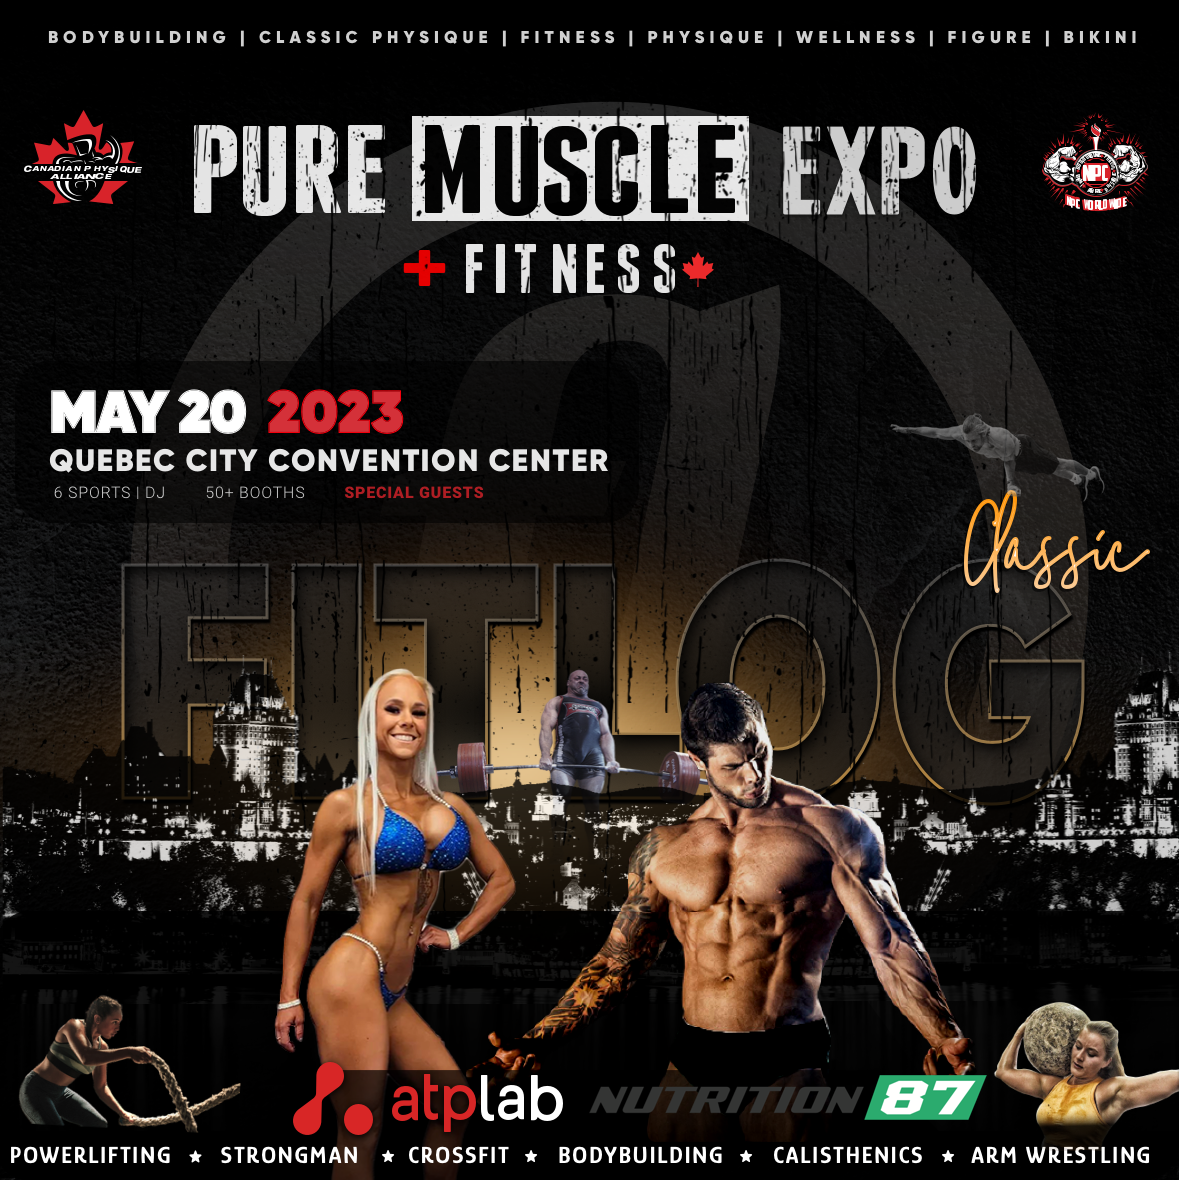 2023 Pure Muscle + Fitness Championships, CPA, Bodybuilding, Physique, Figure, Wellness, Bikini